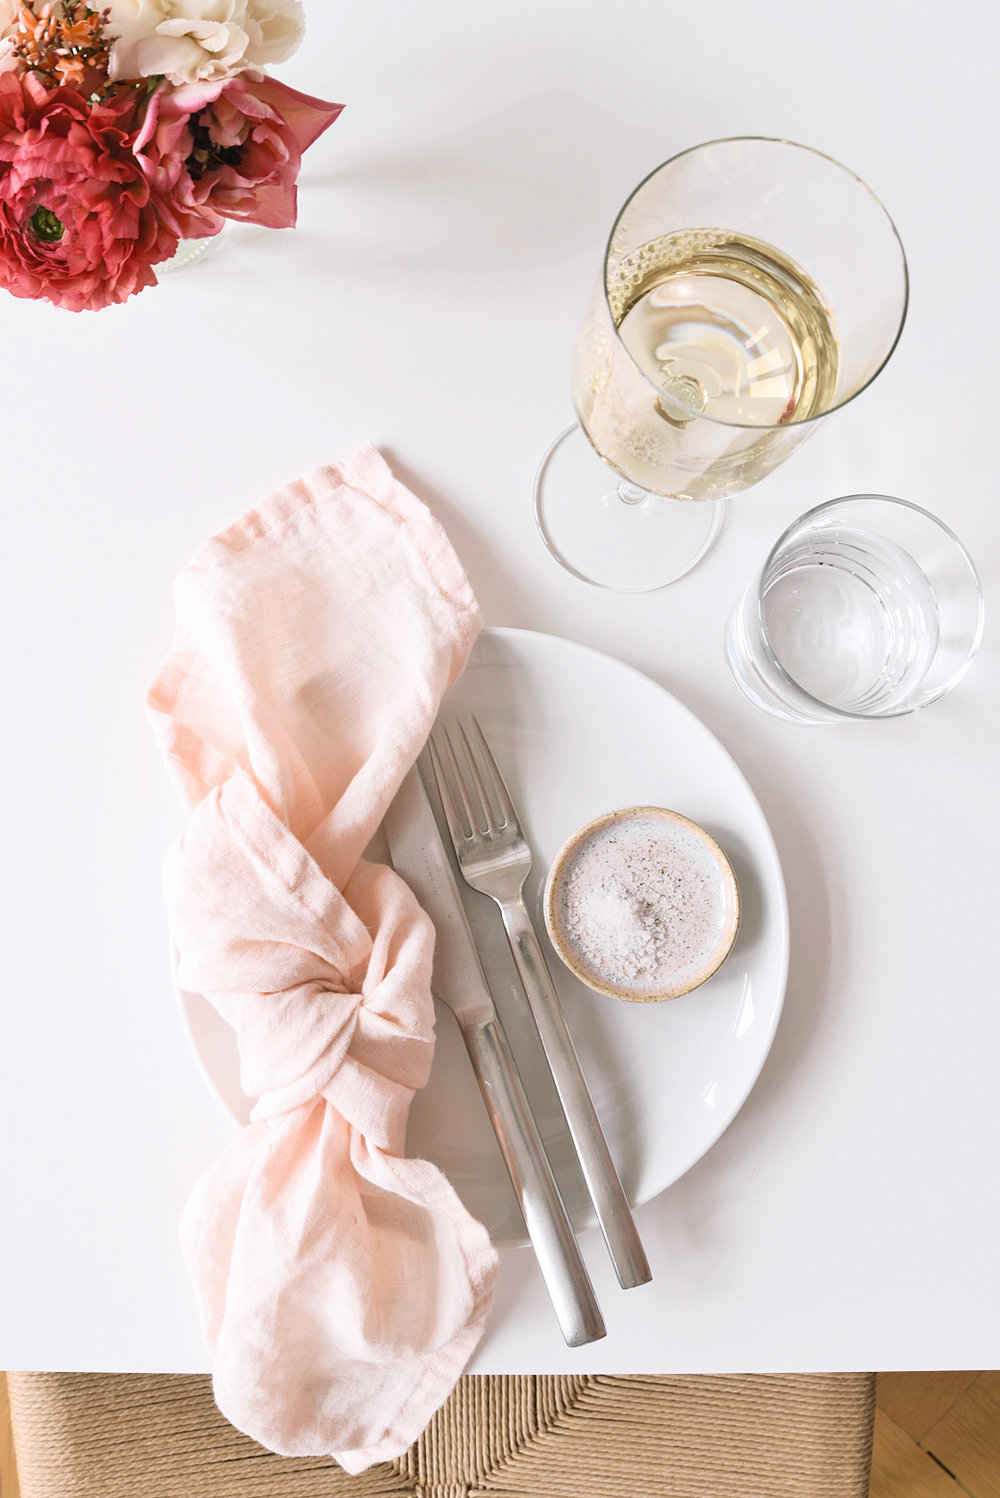 March Dinner Party Inspiration With Pale Salmon + Fresh Flowers